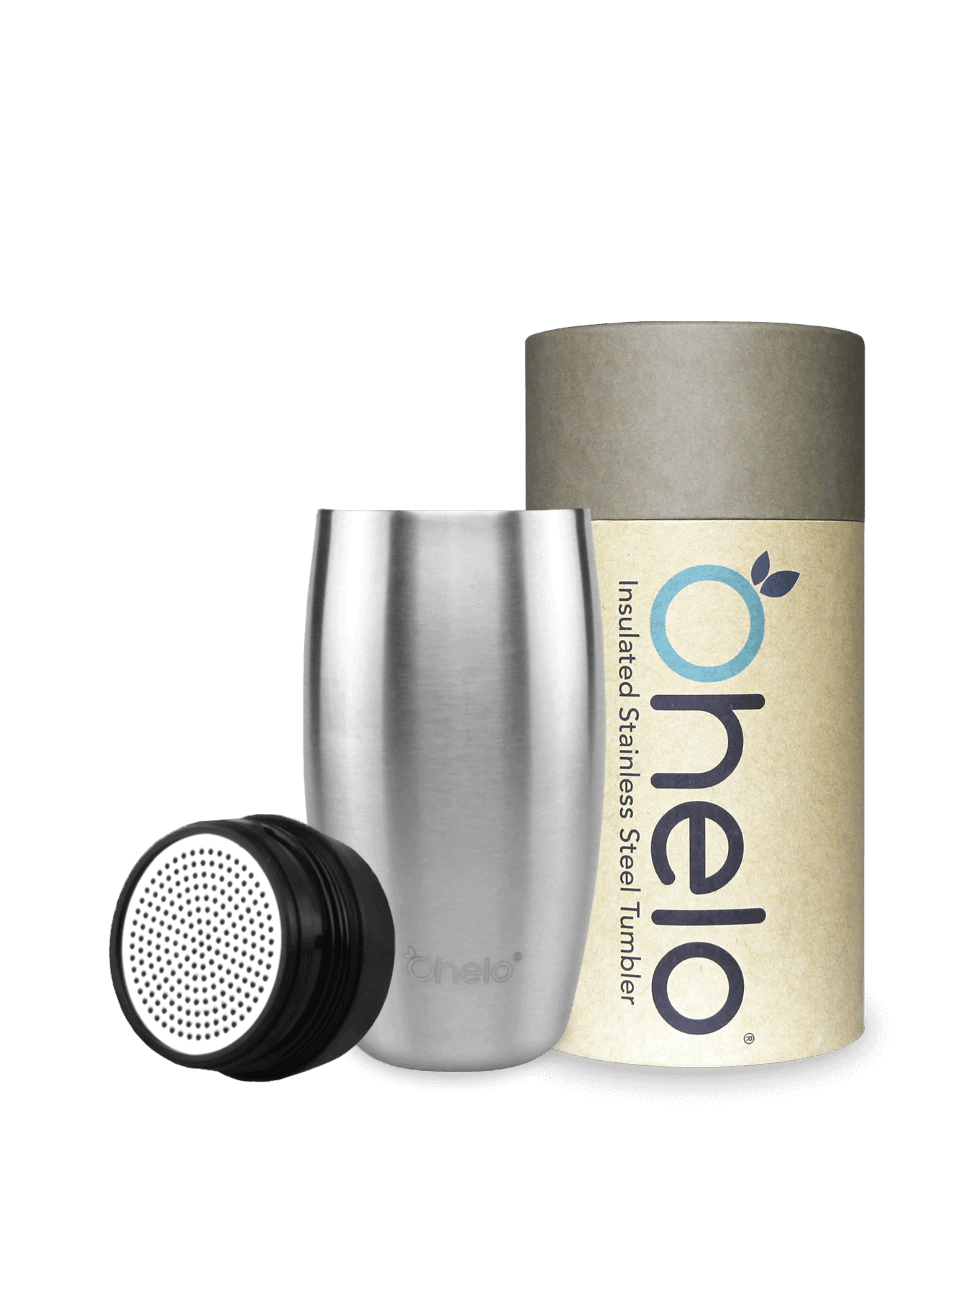 Ohelo insulated travel mug in stainless steel with removable tea strainer and recycled packaging